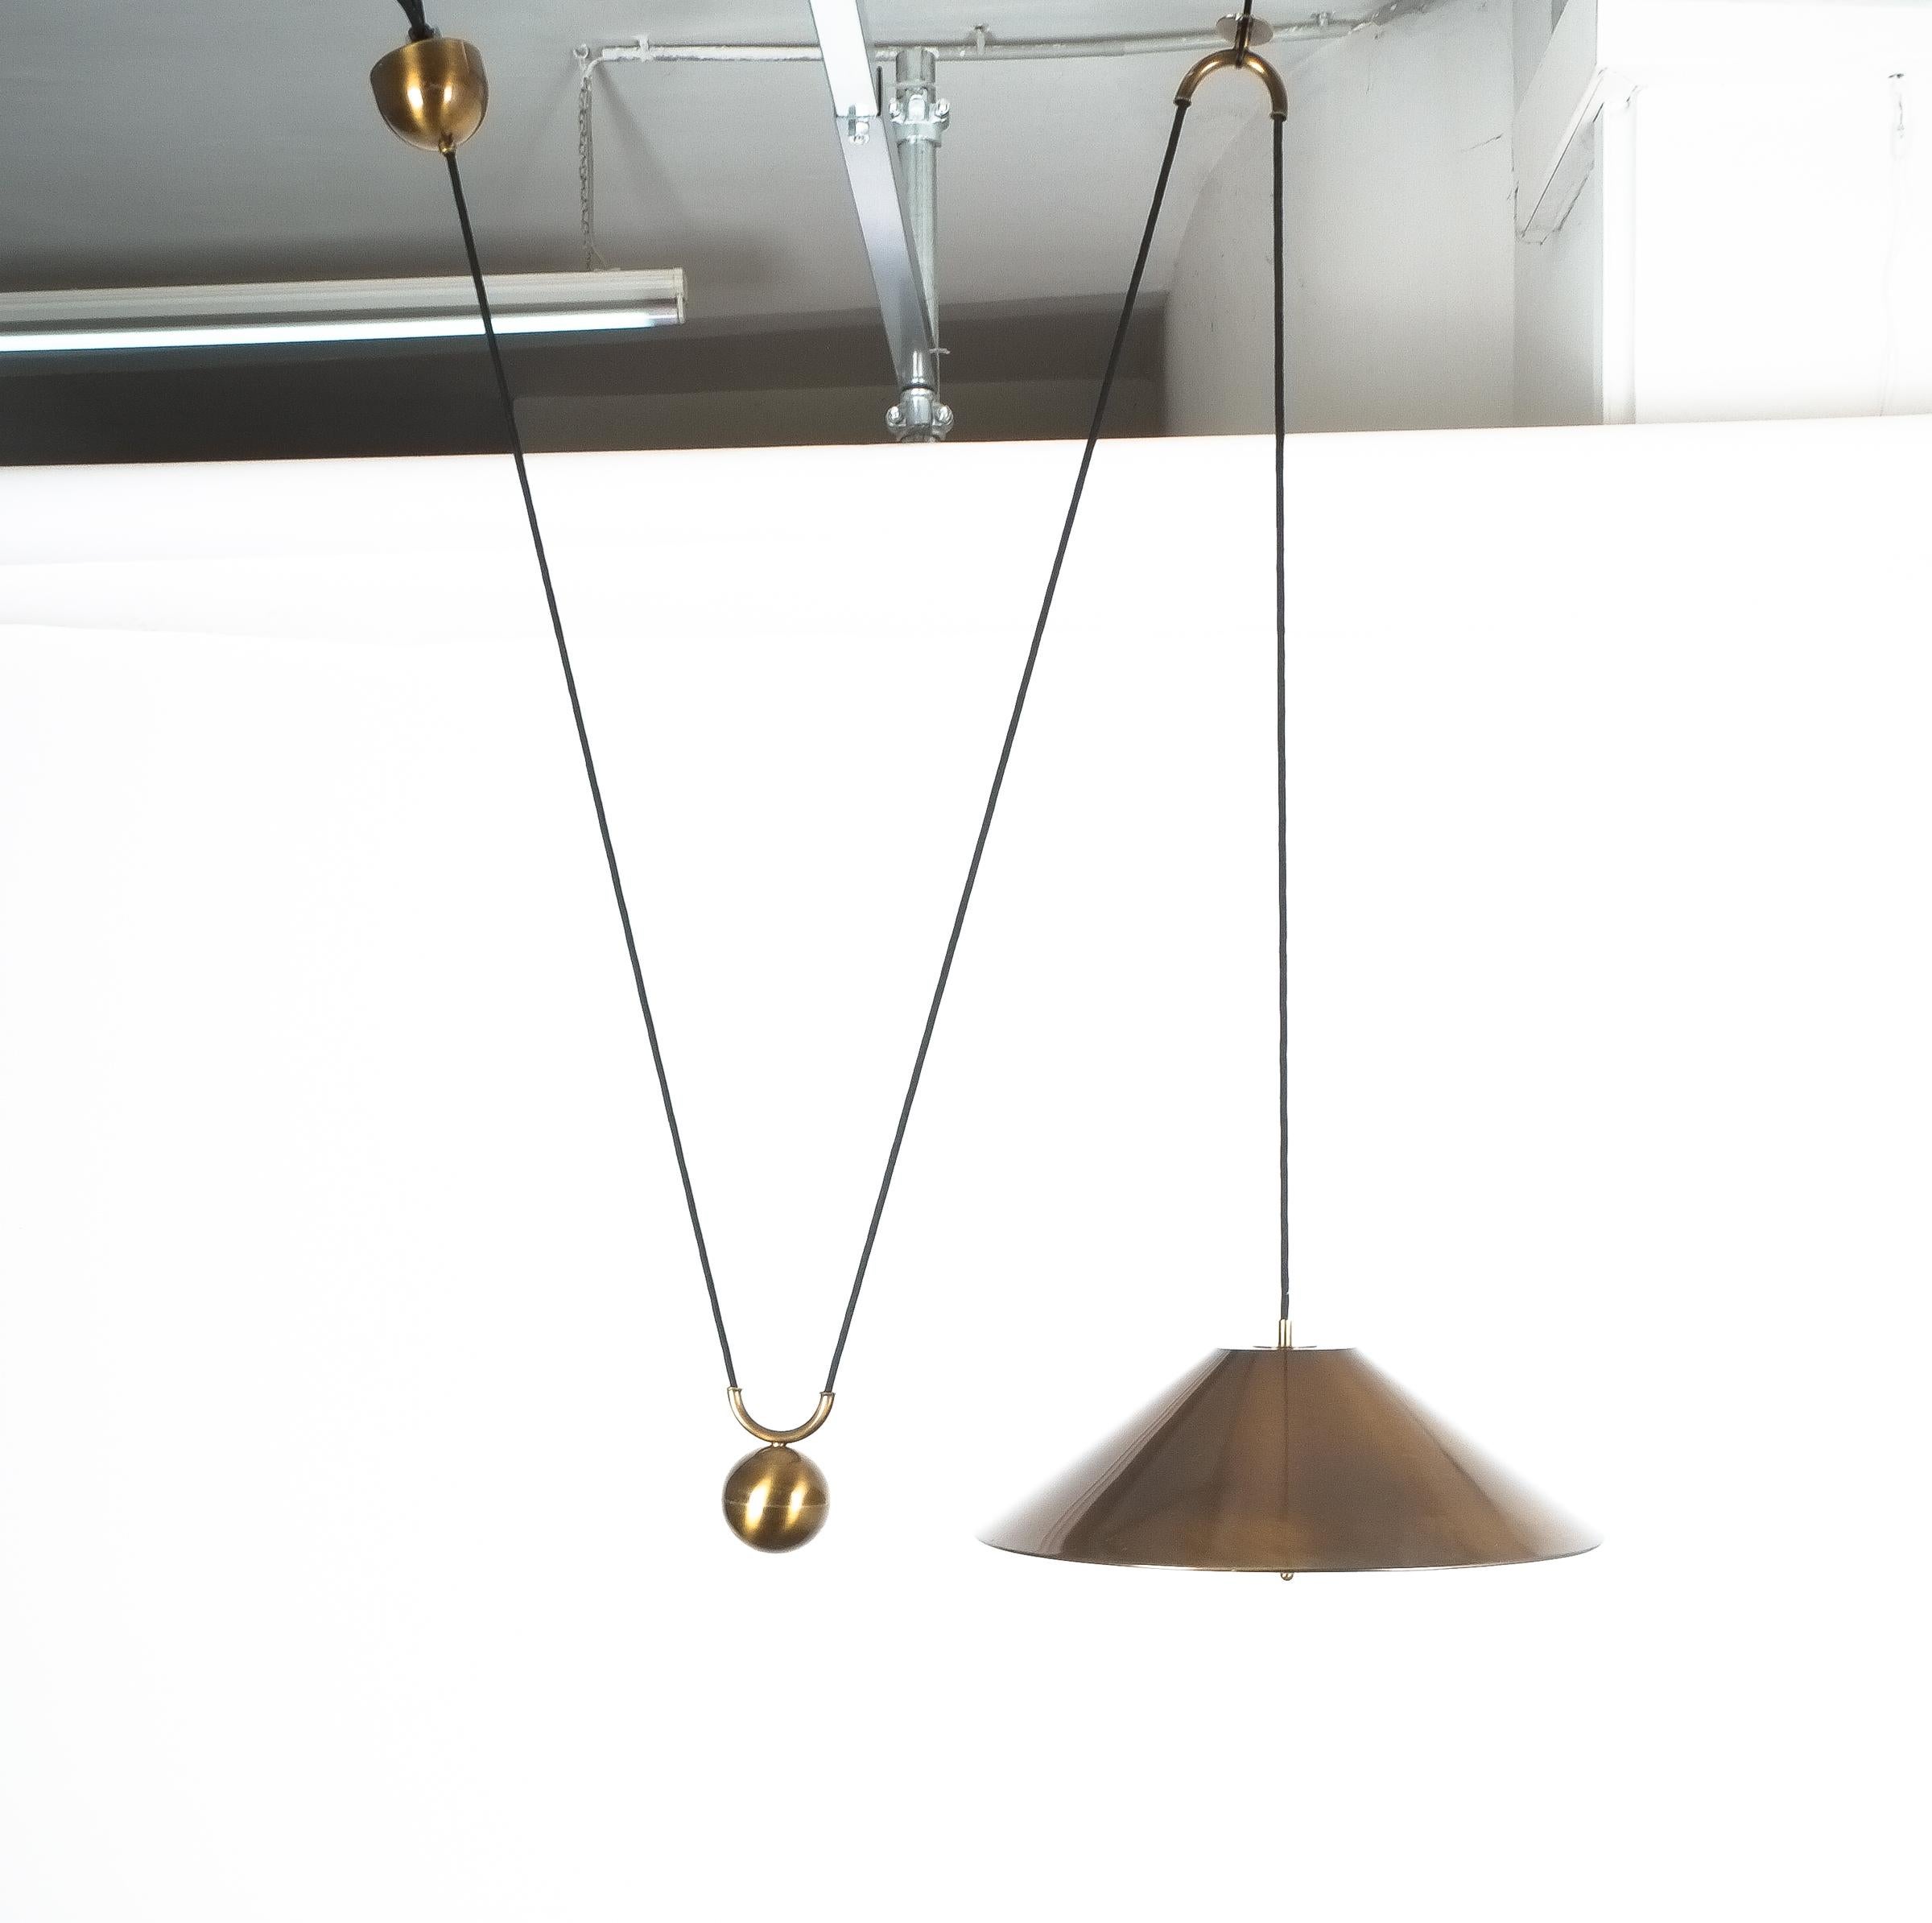 Large adjustable brass counterweight pendant lamp by Florian Schulz. Elegant burnished brass counterbalance light by Florian Schulz/Germany with a 20 inch shade and heavy counterweight to easily adjust the light in height. Very good condition, it